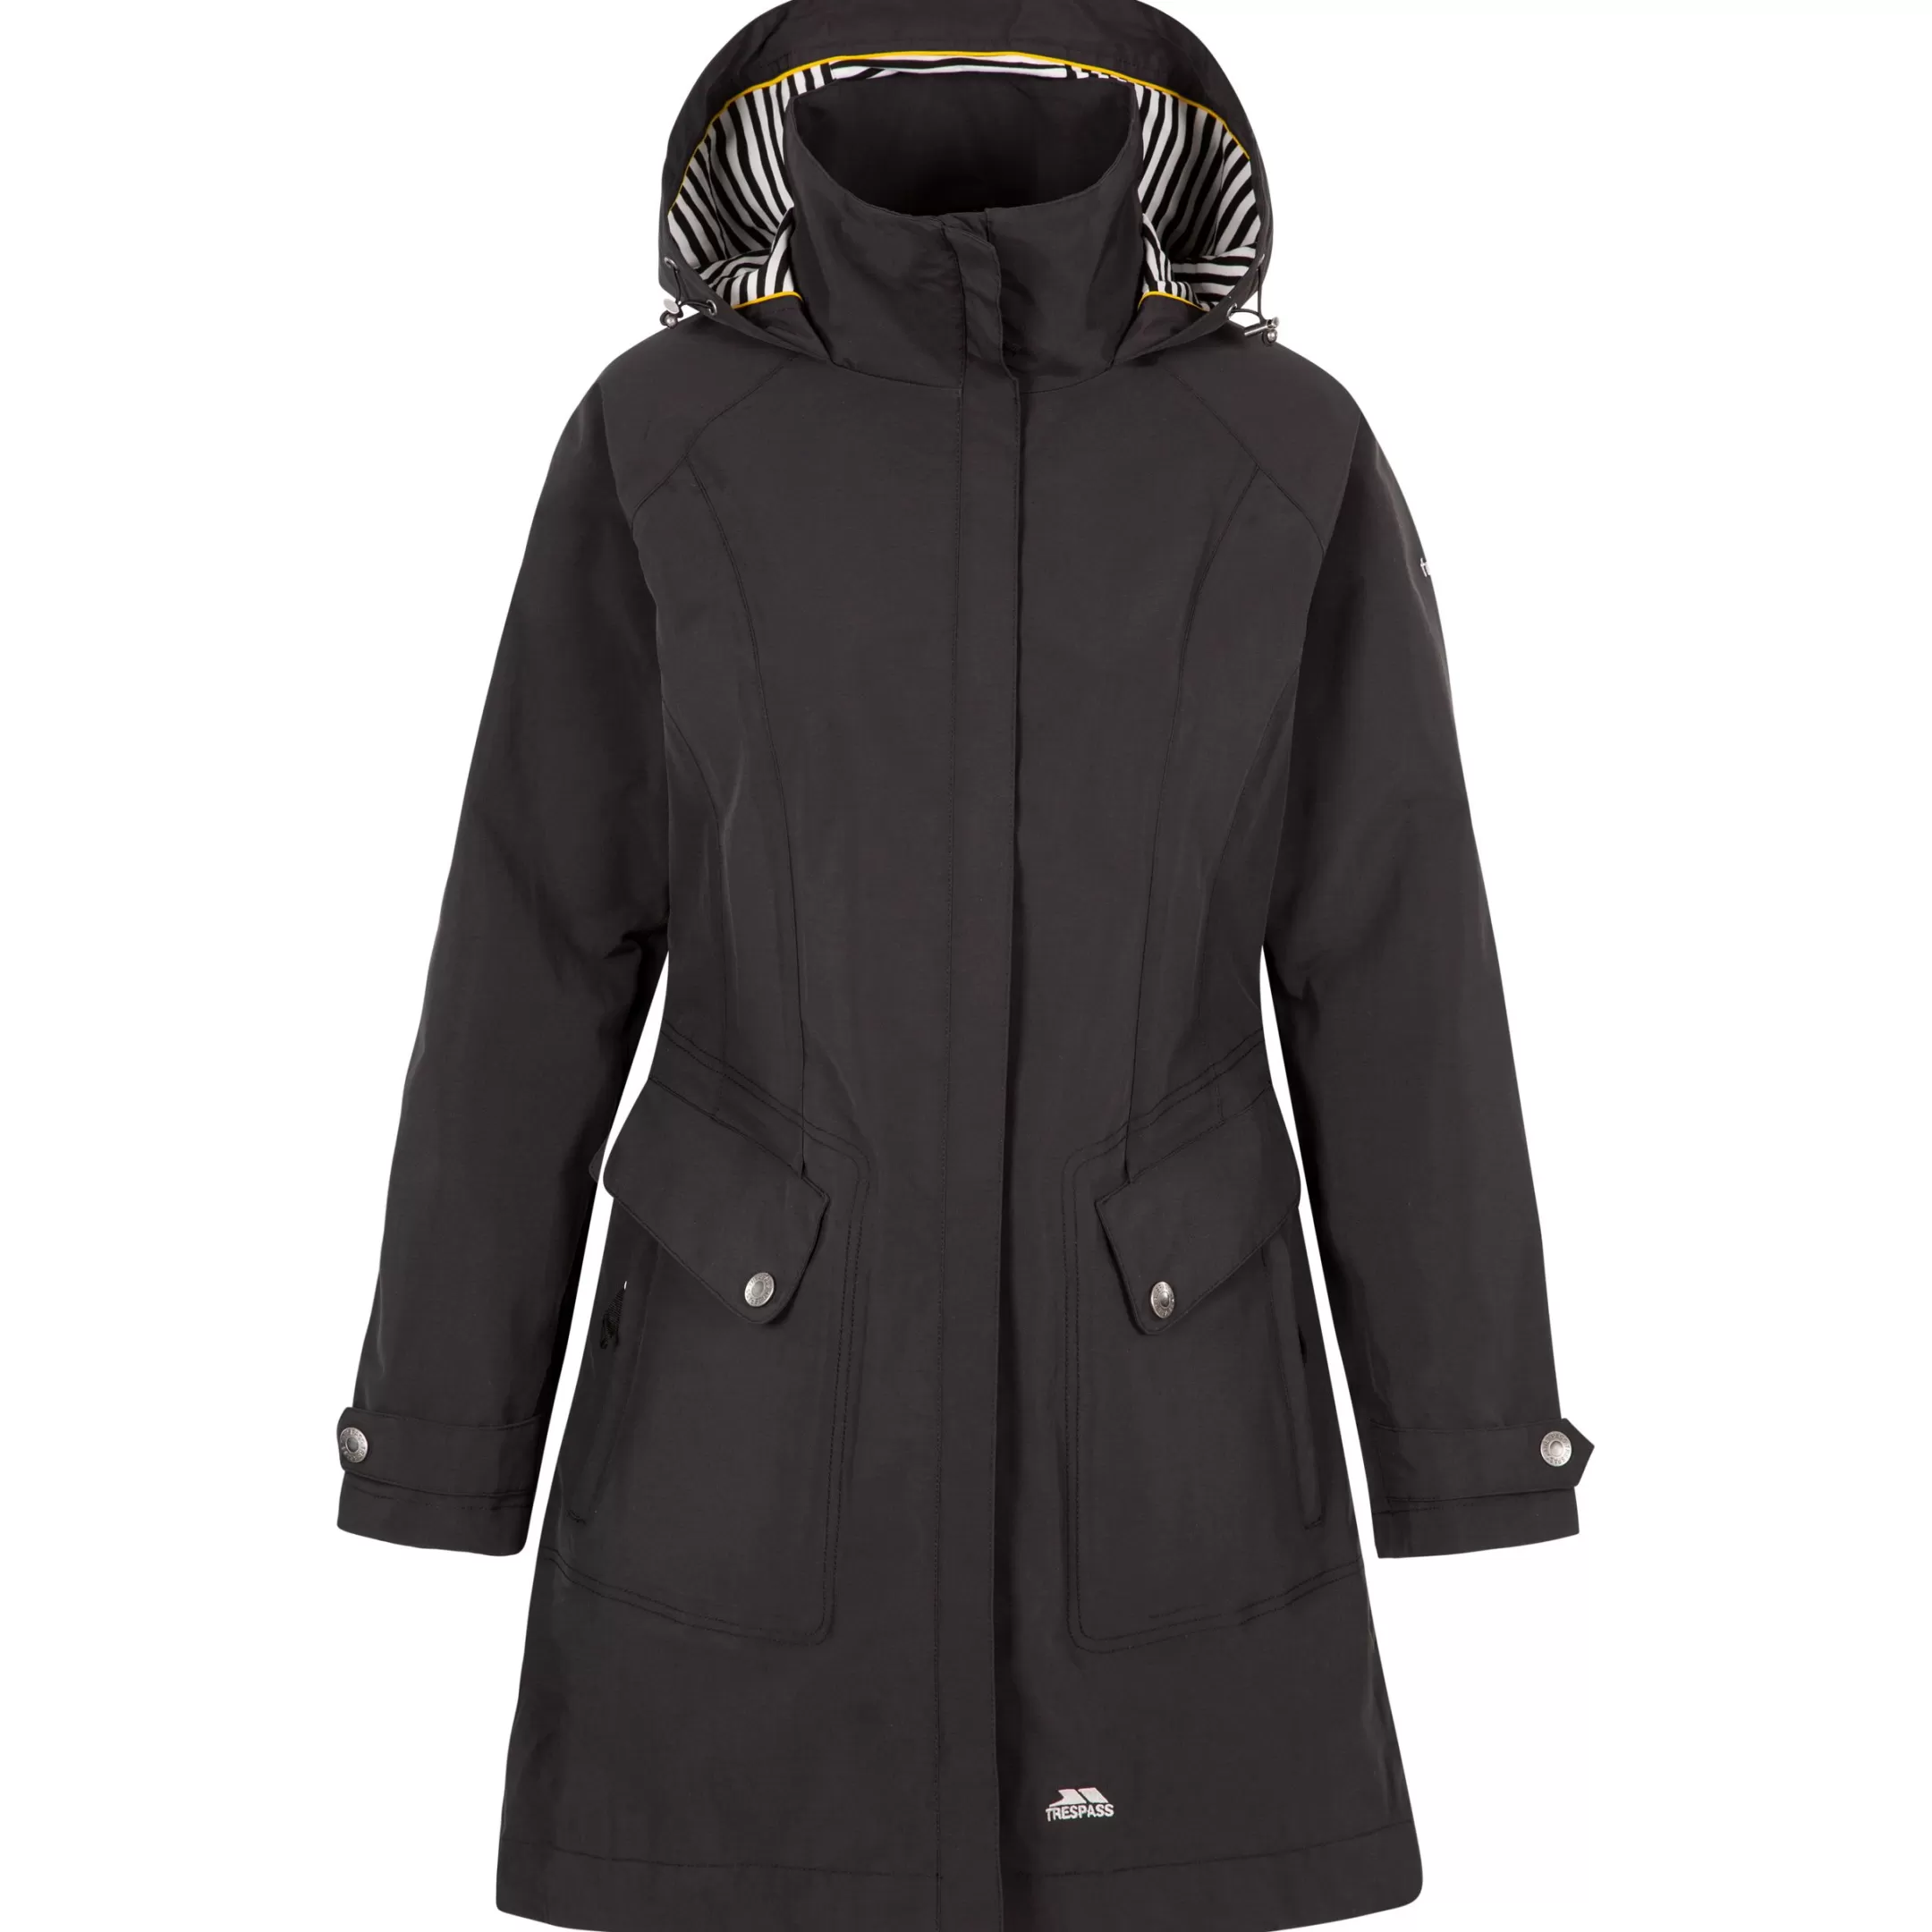 Womens Waterproof Jacket Rainy Day | Trespass Outlet